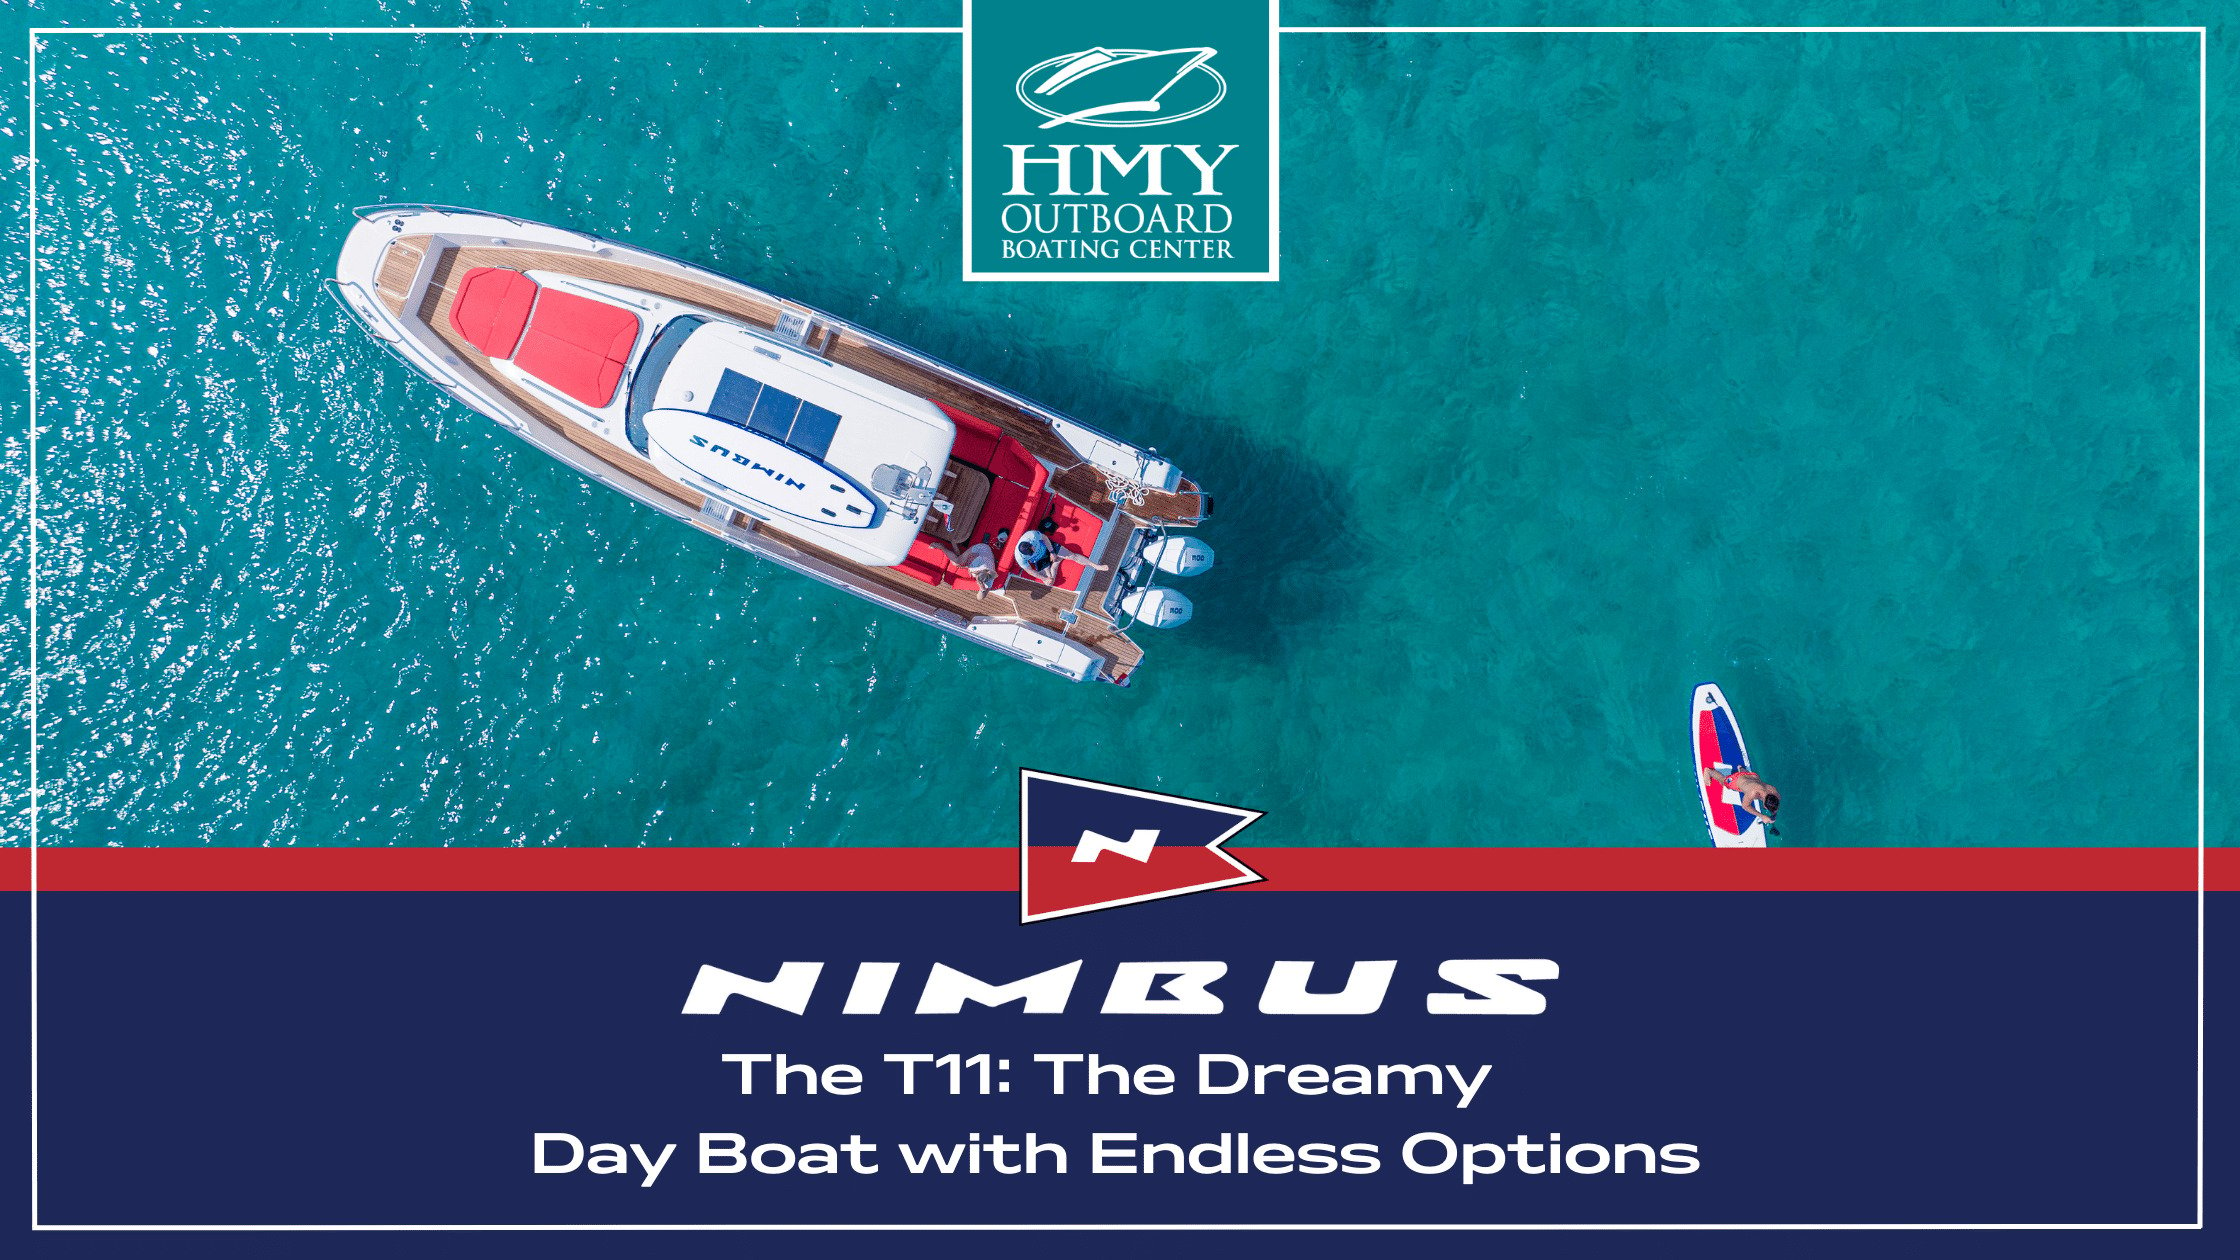 Nimbus T11: The Dreamy Day Boat with Endless Options